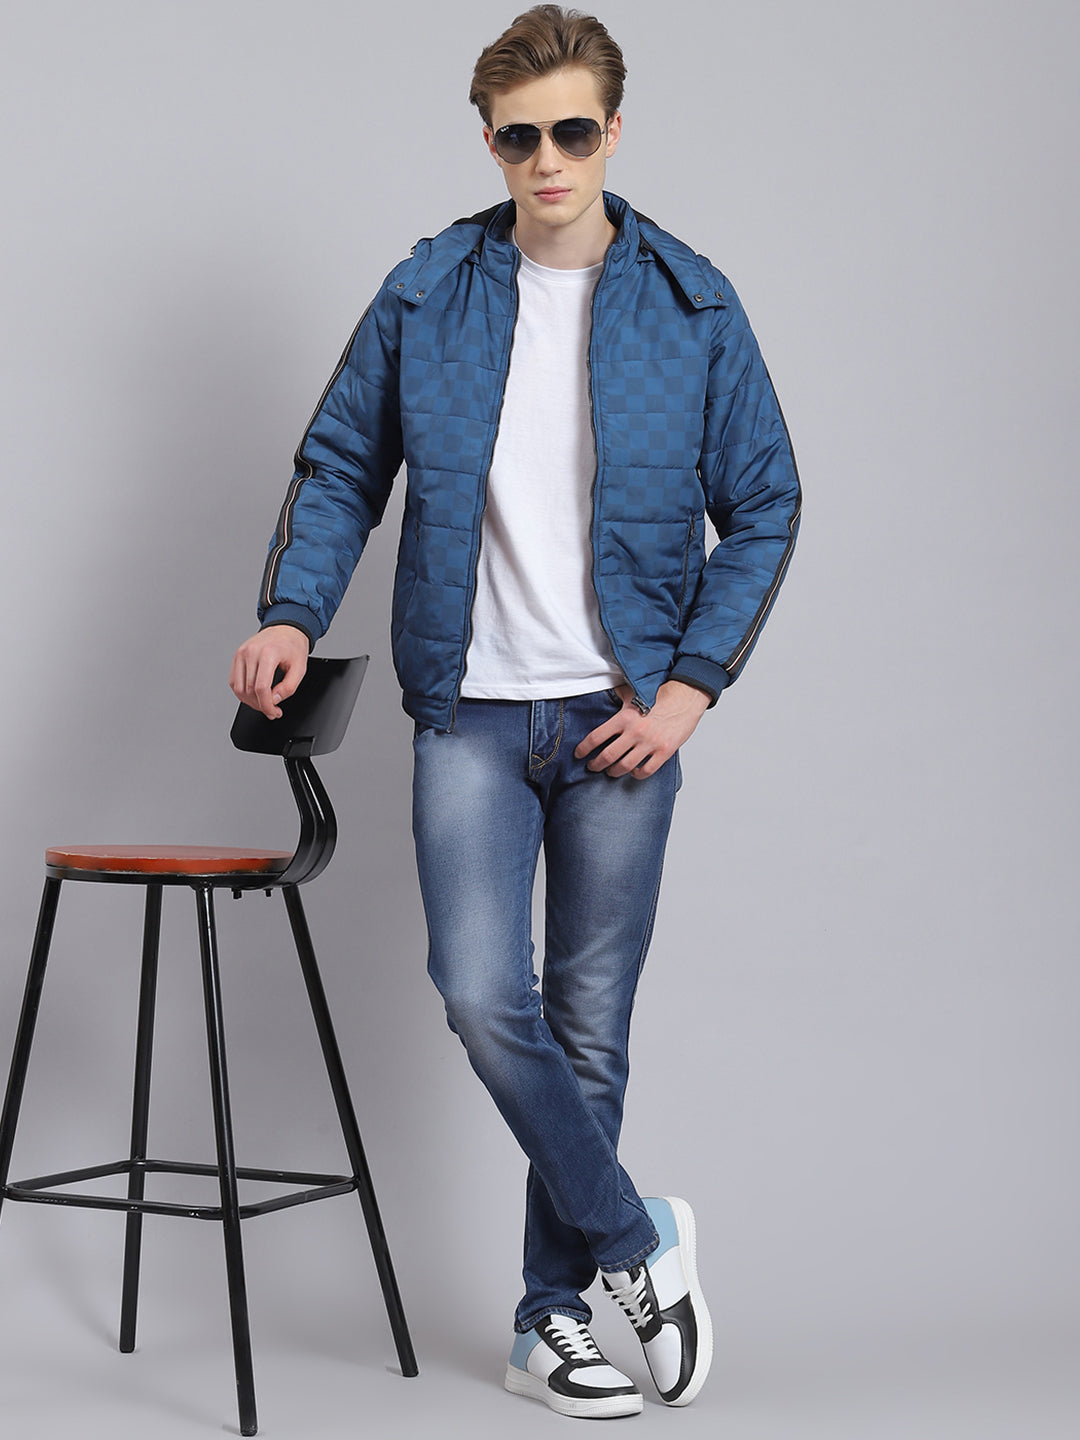 Blue Denim Jacket with Blue Athletic Shoes Outfits For Men (14 ideas &  outfits) | Lookastic